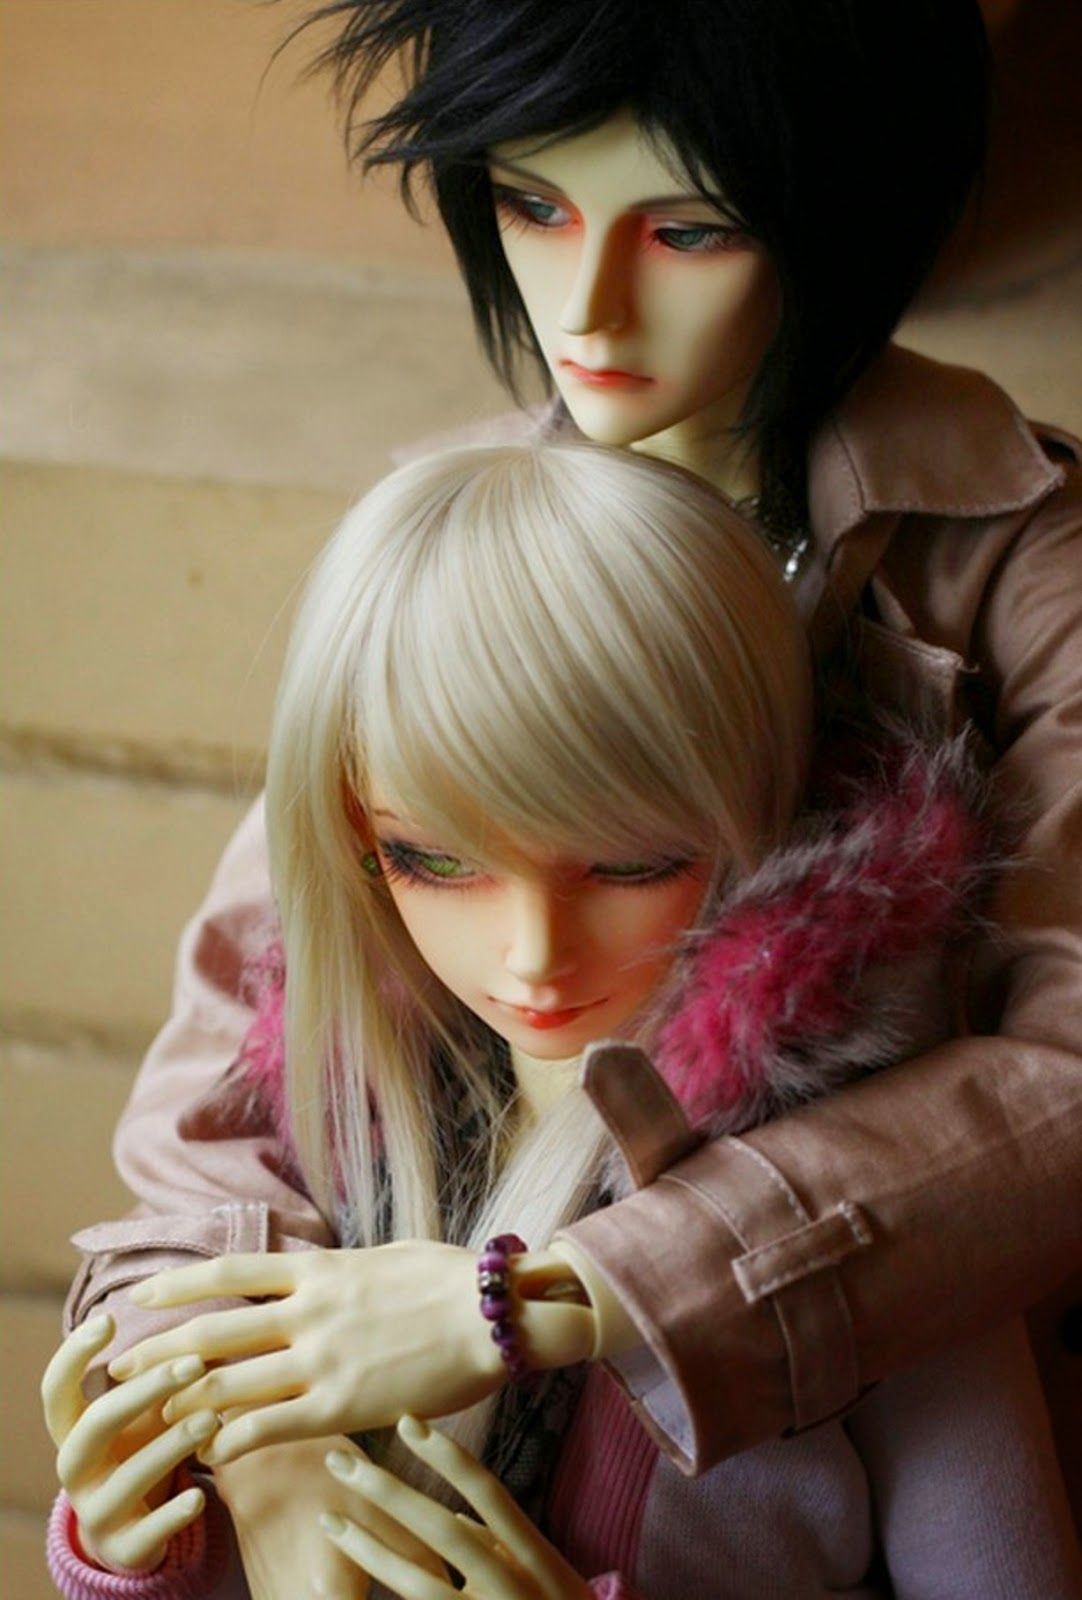 Cute Doll Couple Wallpapers on WallpaperDog